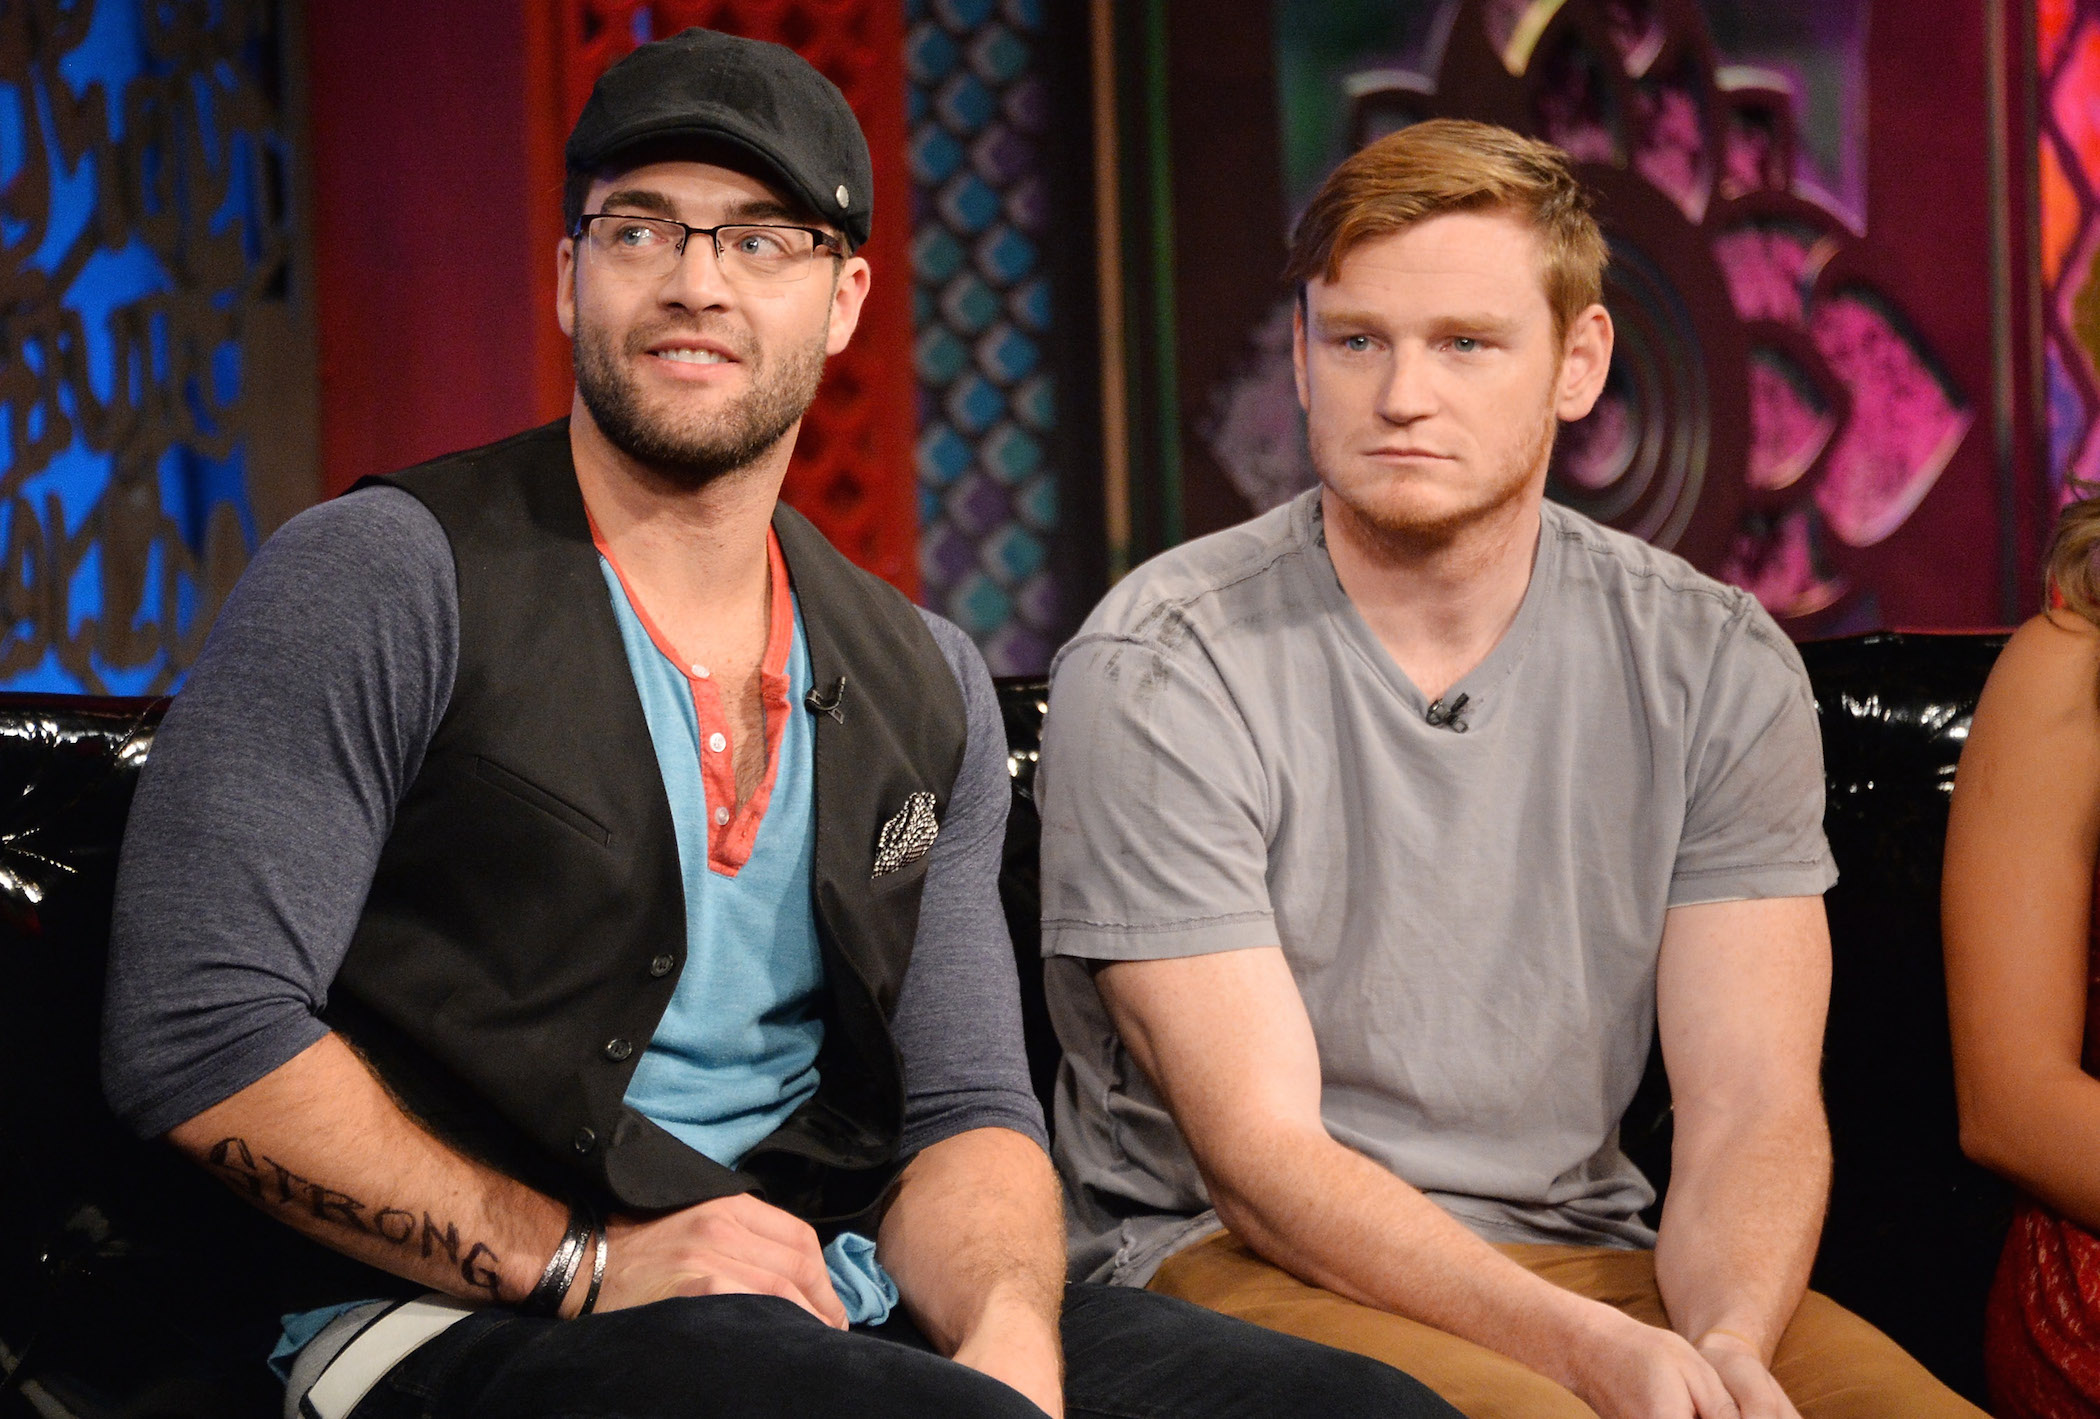 CT Tamburello and Wes Bergmann on MTV's 'The Challenge: Rivals II' final episode and reunion party